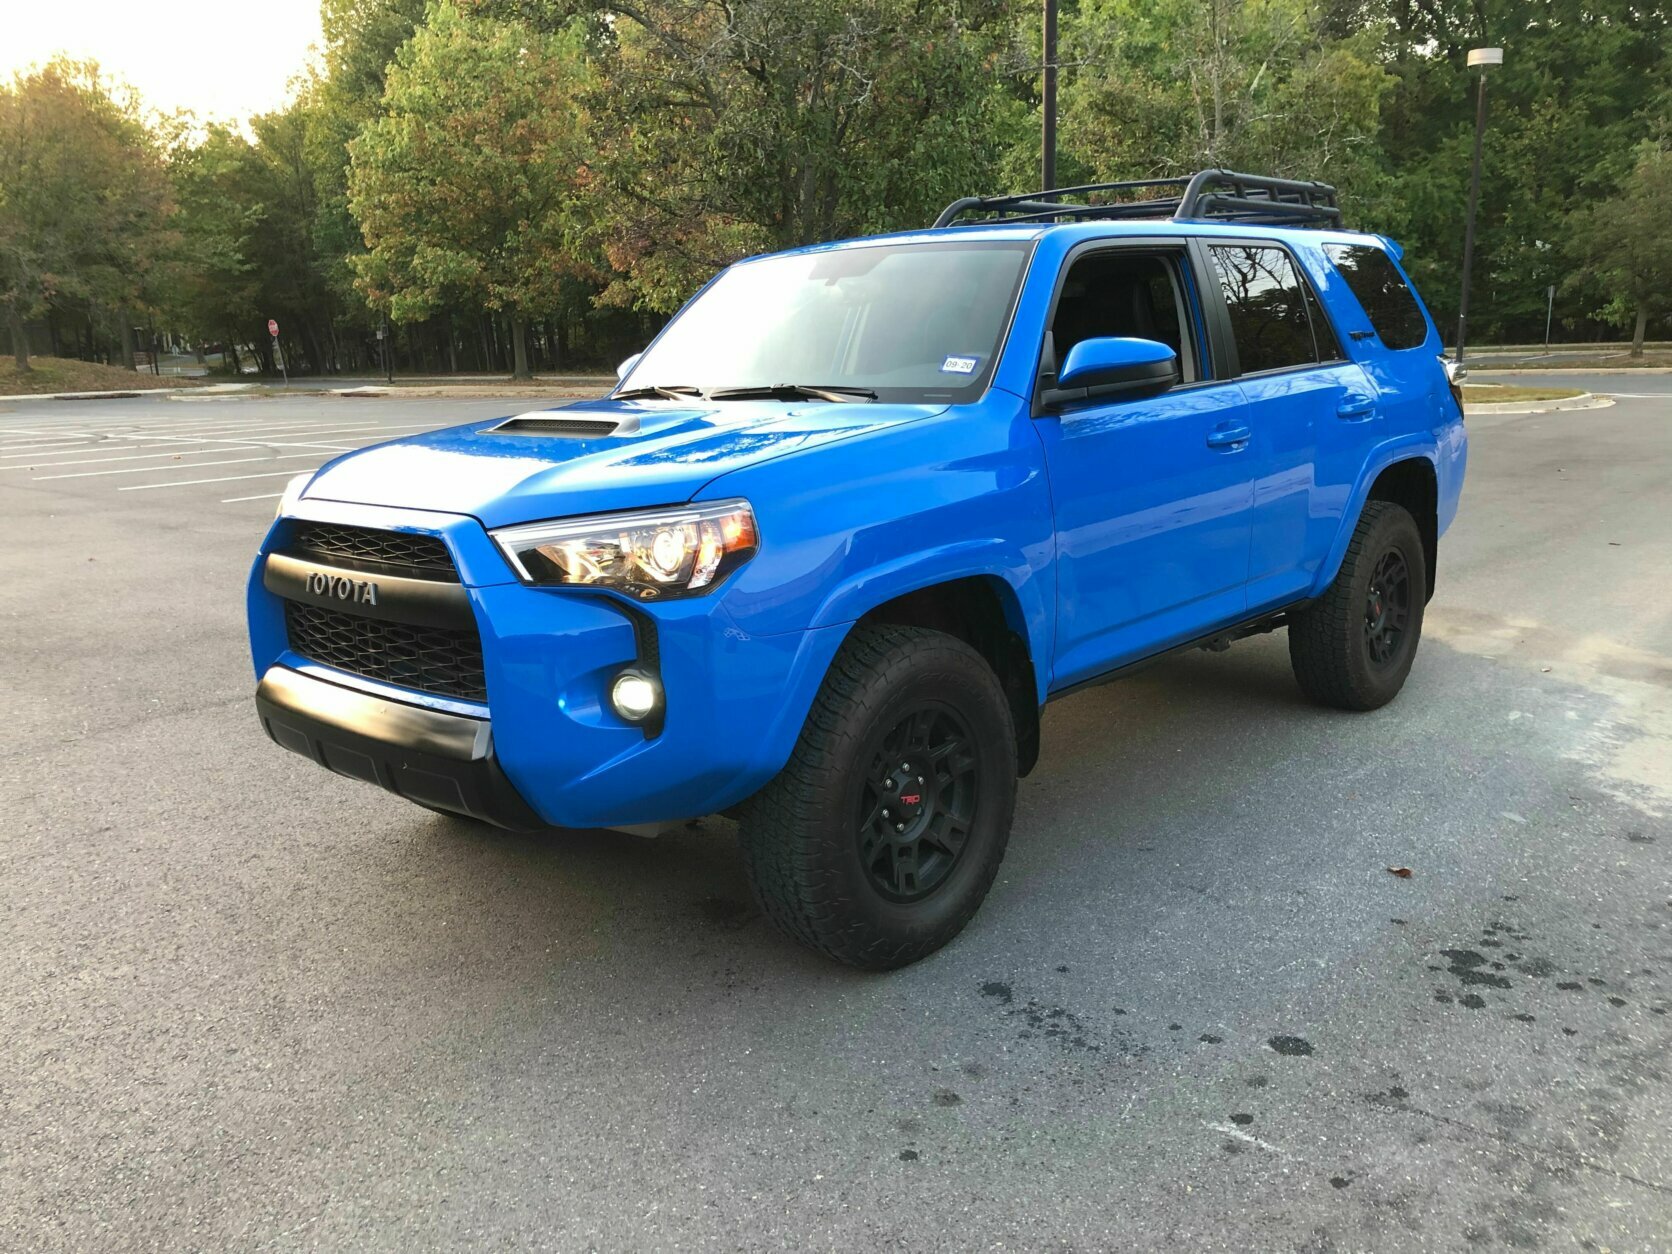 Car Review Toyota S 4runner Trd Pro Is A Capable Off Roader And Old School Suv Wtop